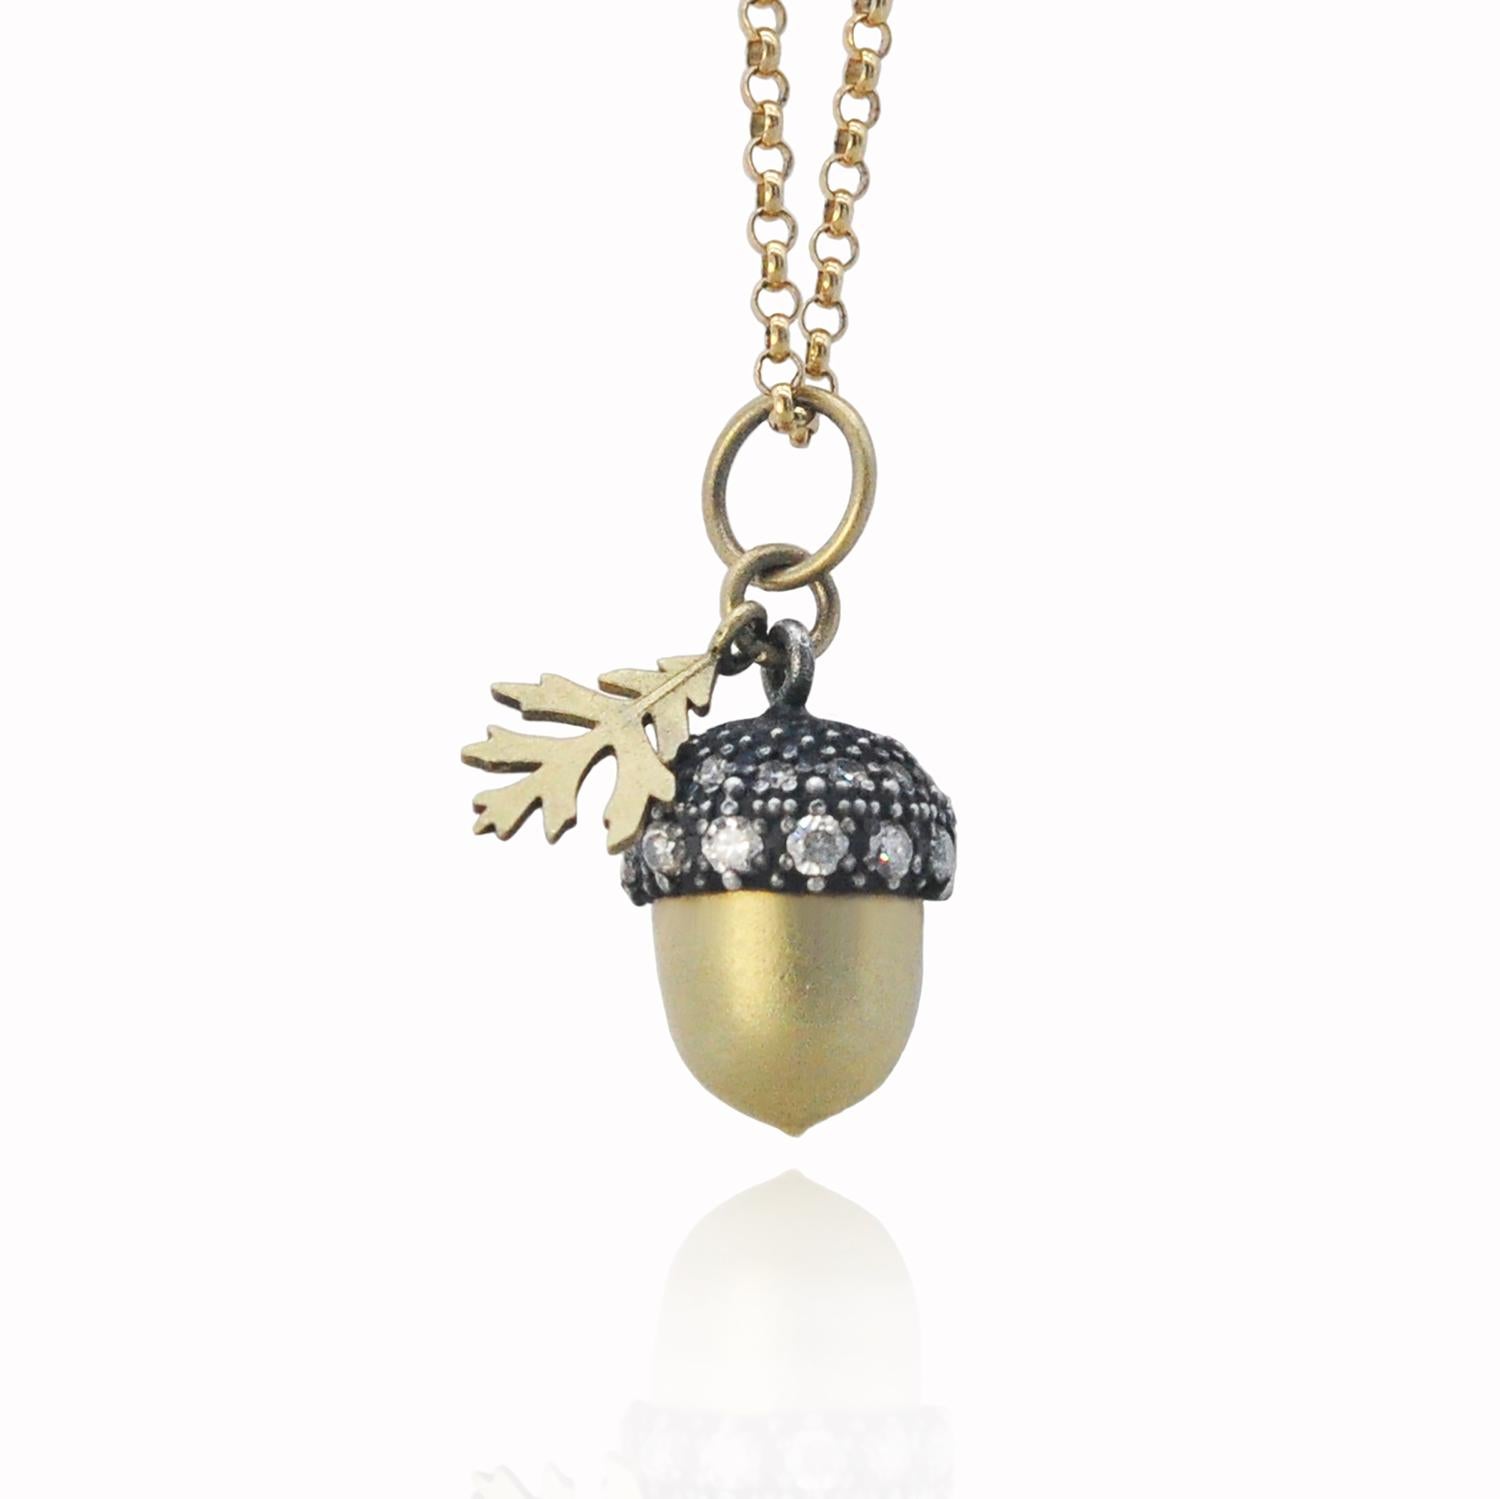 A beautifully crafted oxidized silver and 18k yellow gold acorn set with diamonds with an 18k yellow old gold oak leaf charm that hangs delicately from a 14k yellow gold chain. The perfect piece for the sophisticated bohemian on your gift